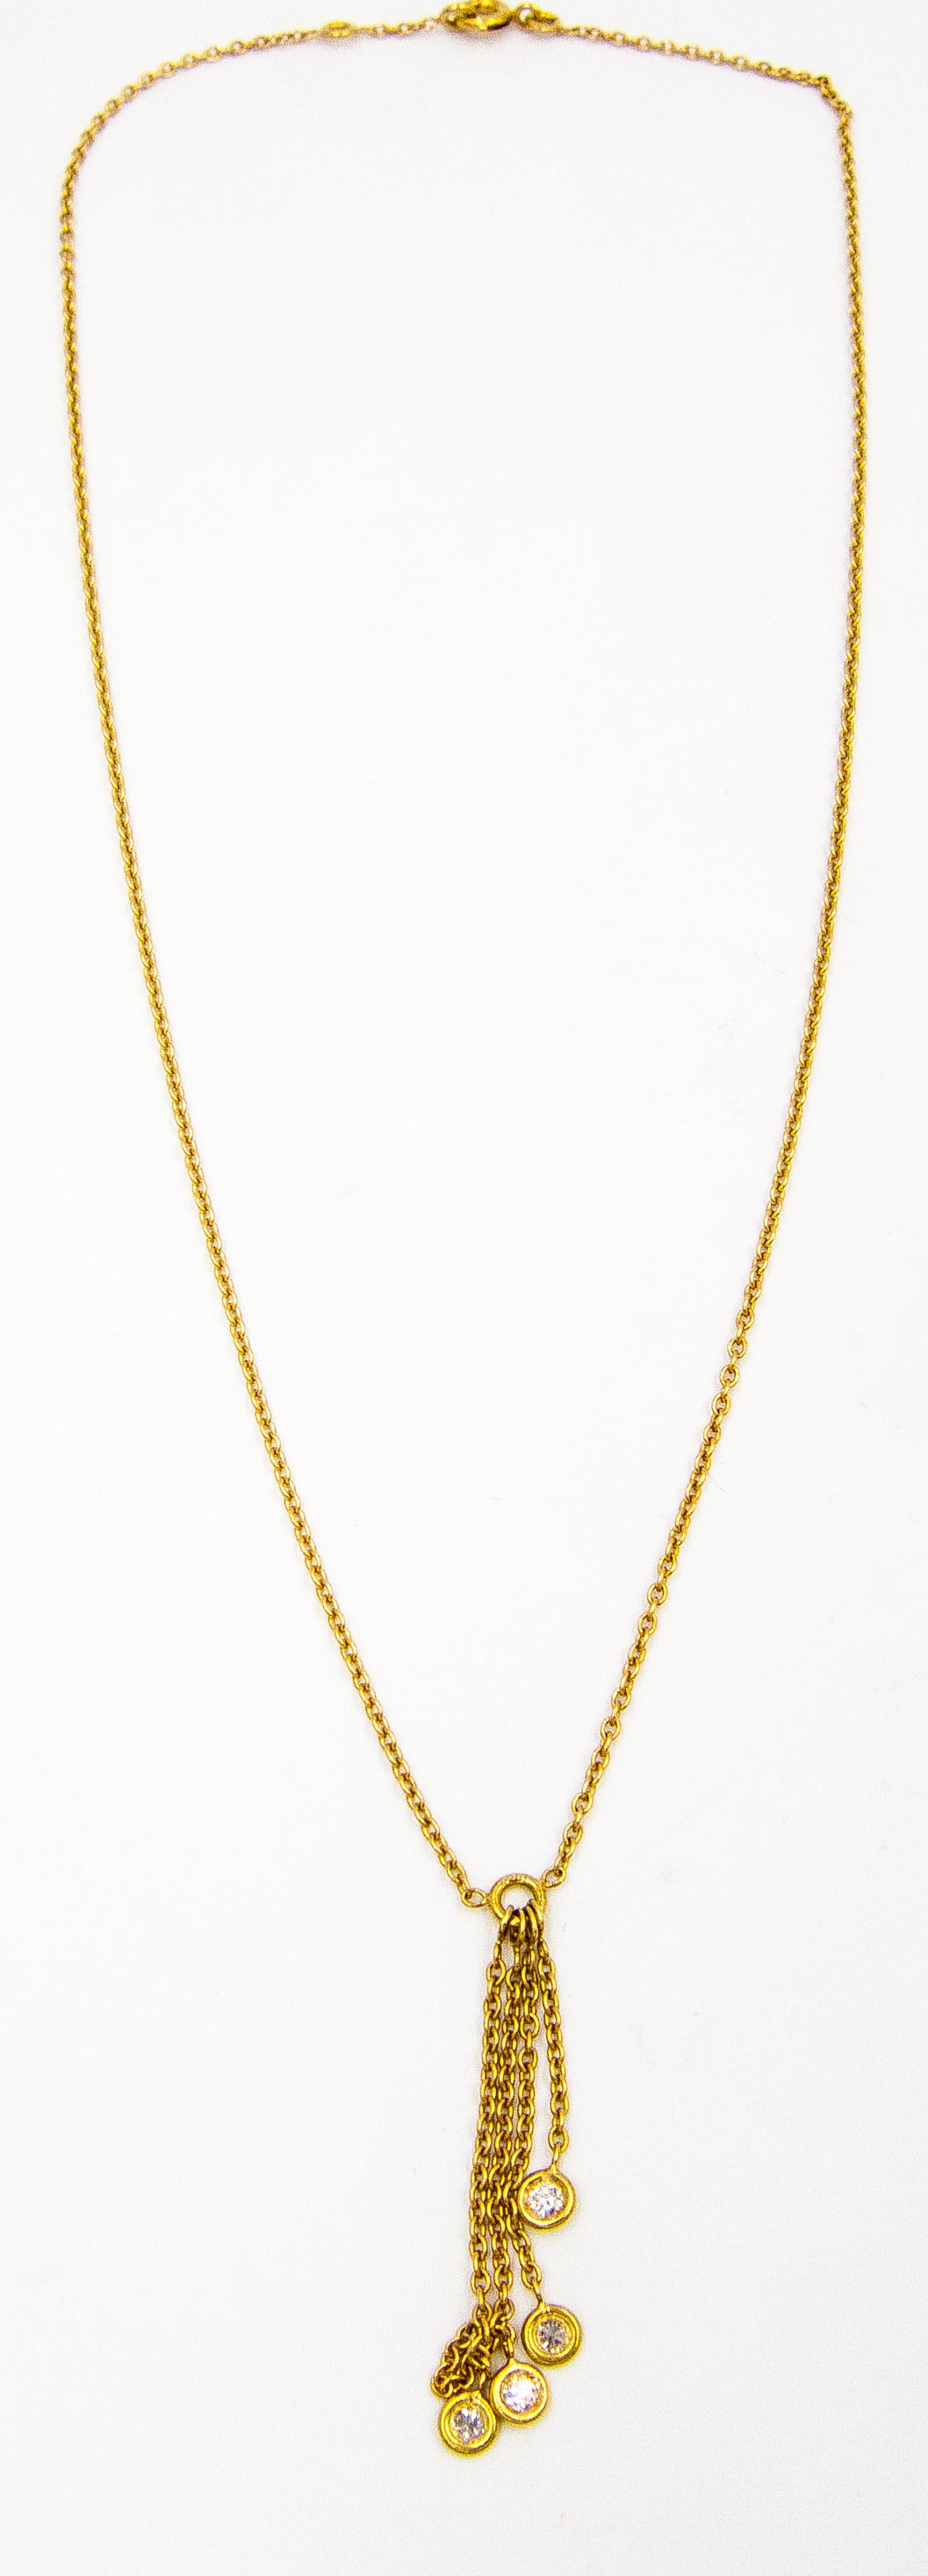 Adorable 18 karat yellow gold and diamond necklace, signed Dior.   The chain measures 15